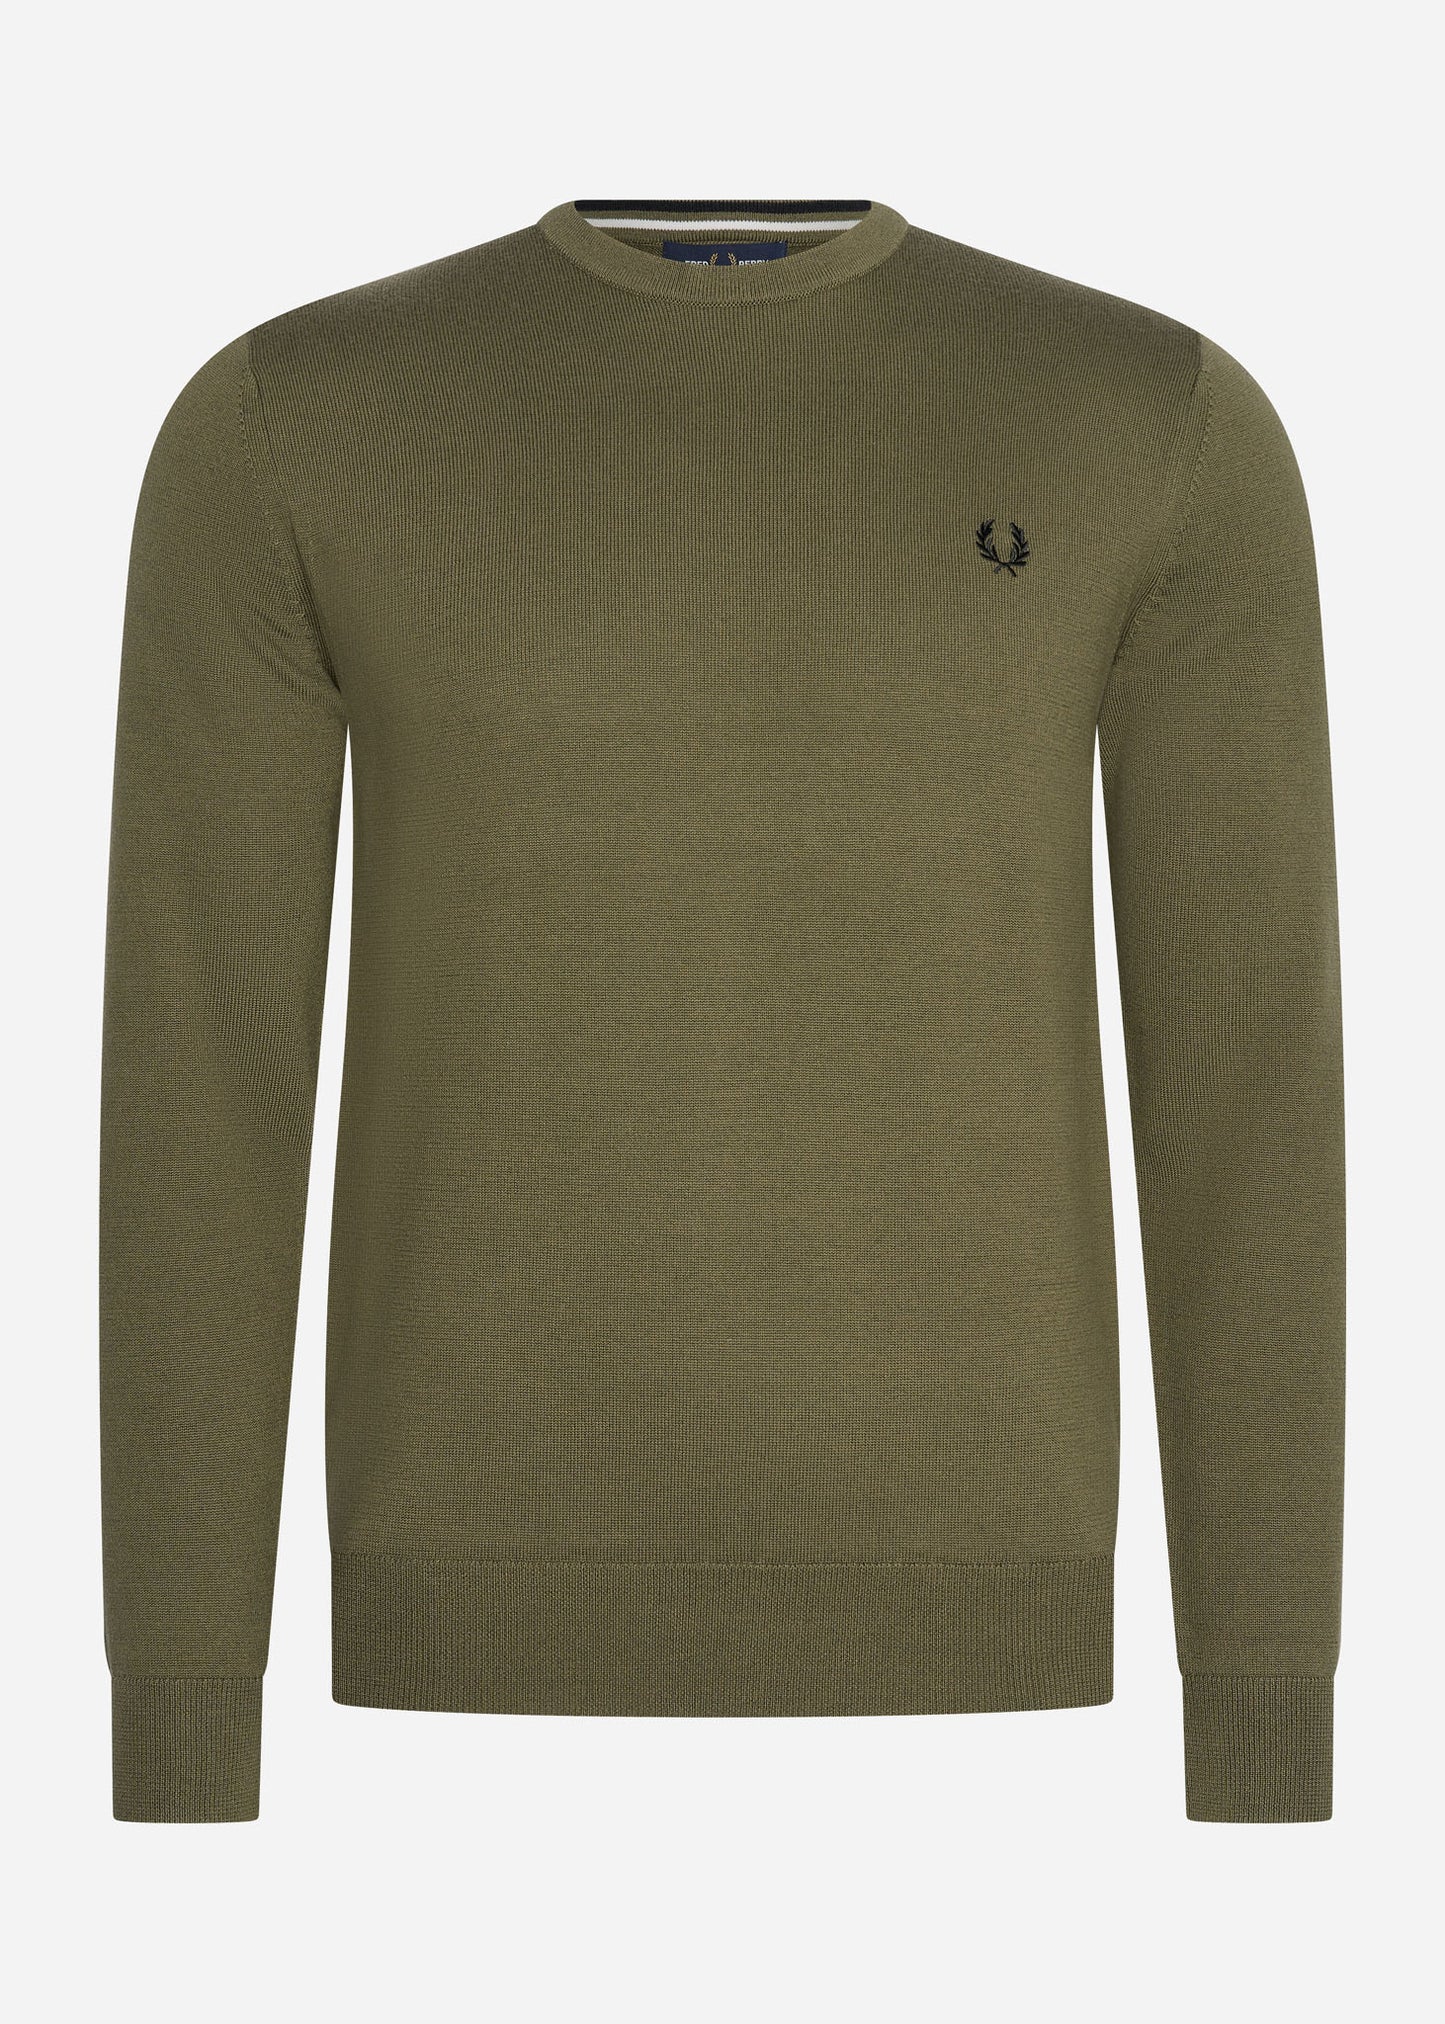 fred perry knit wear classic crew neck jumper green 